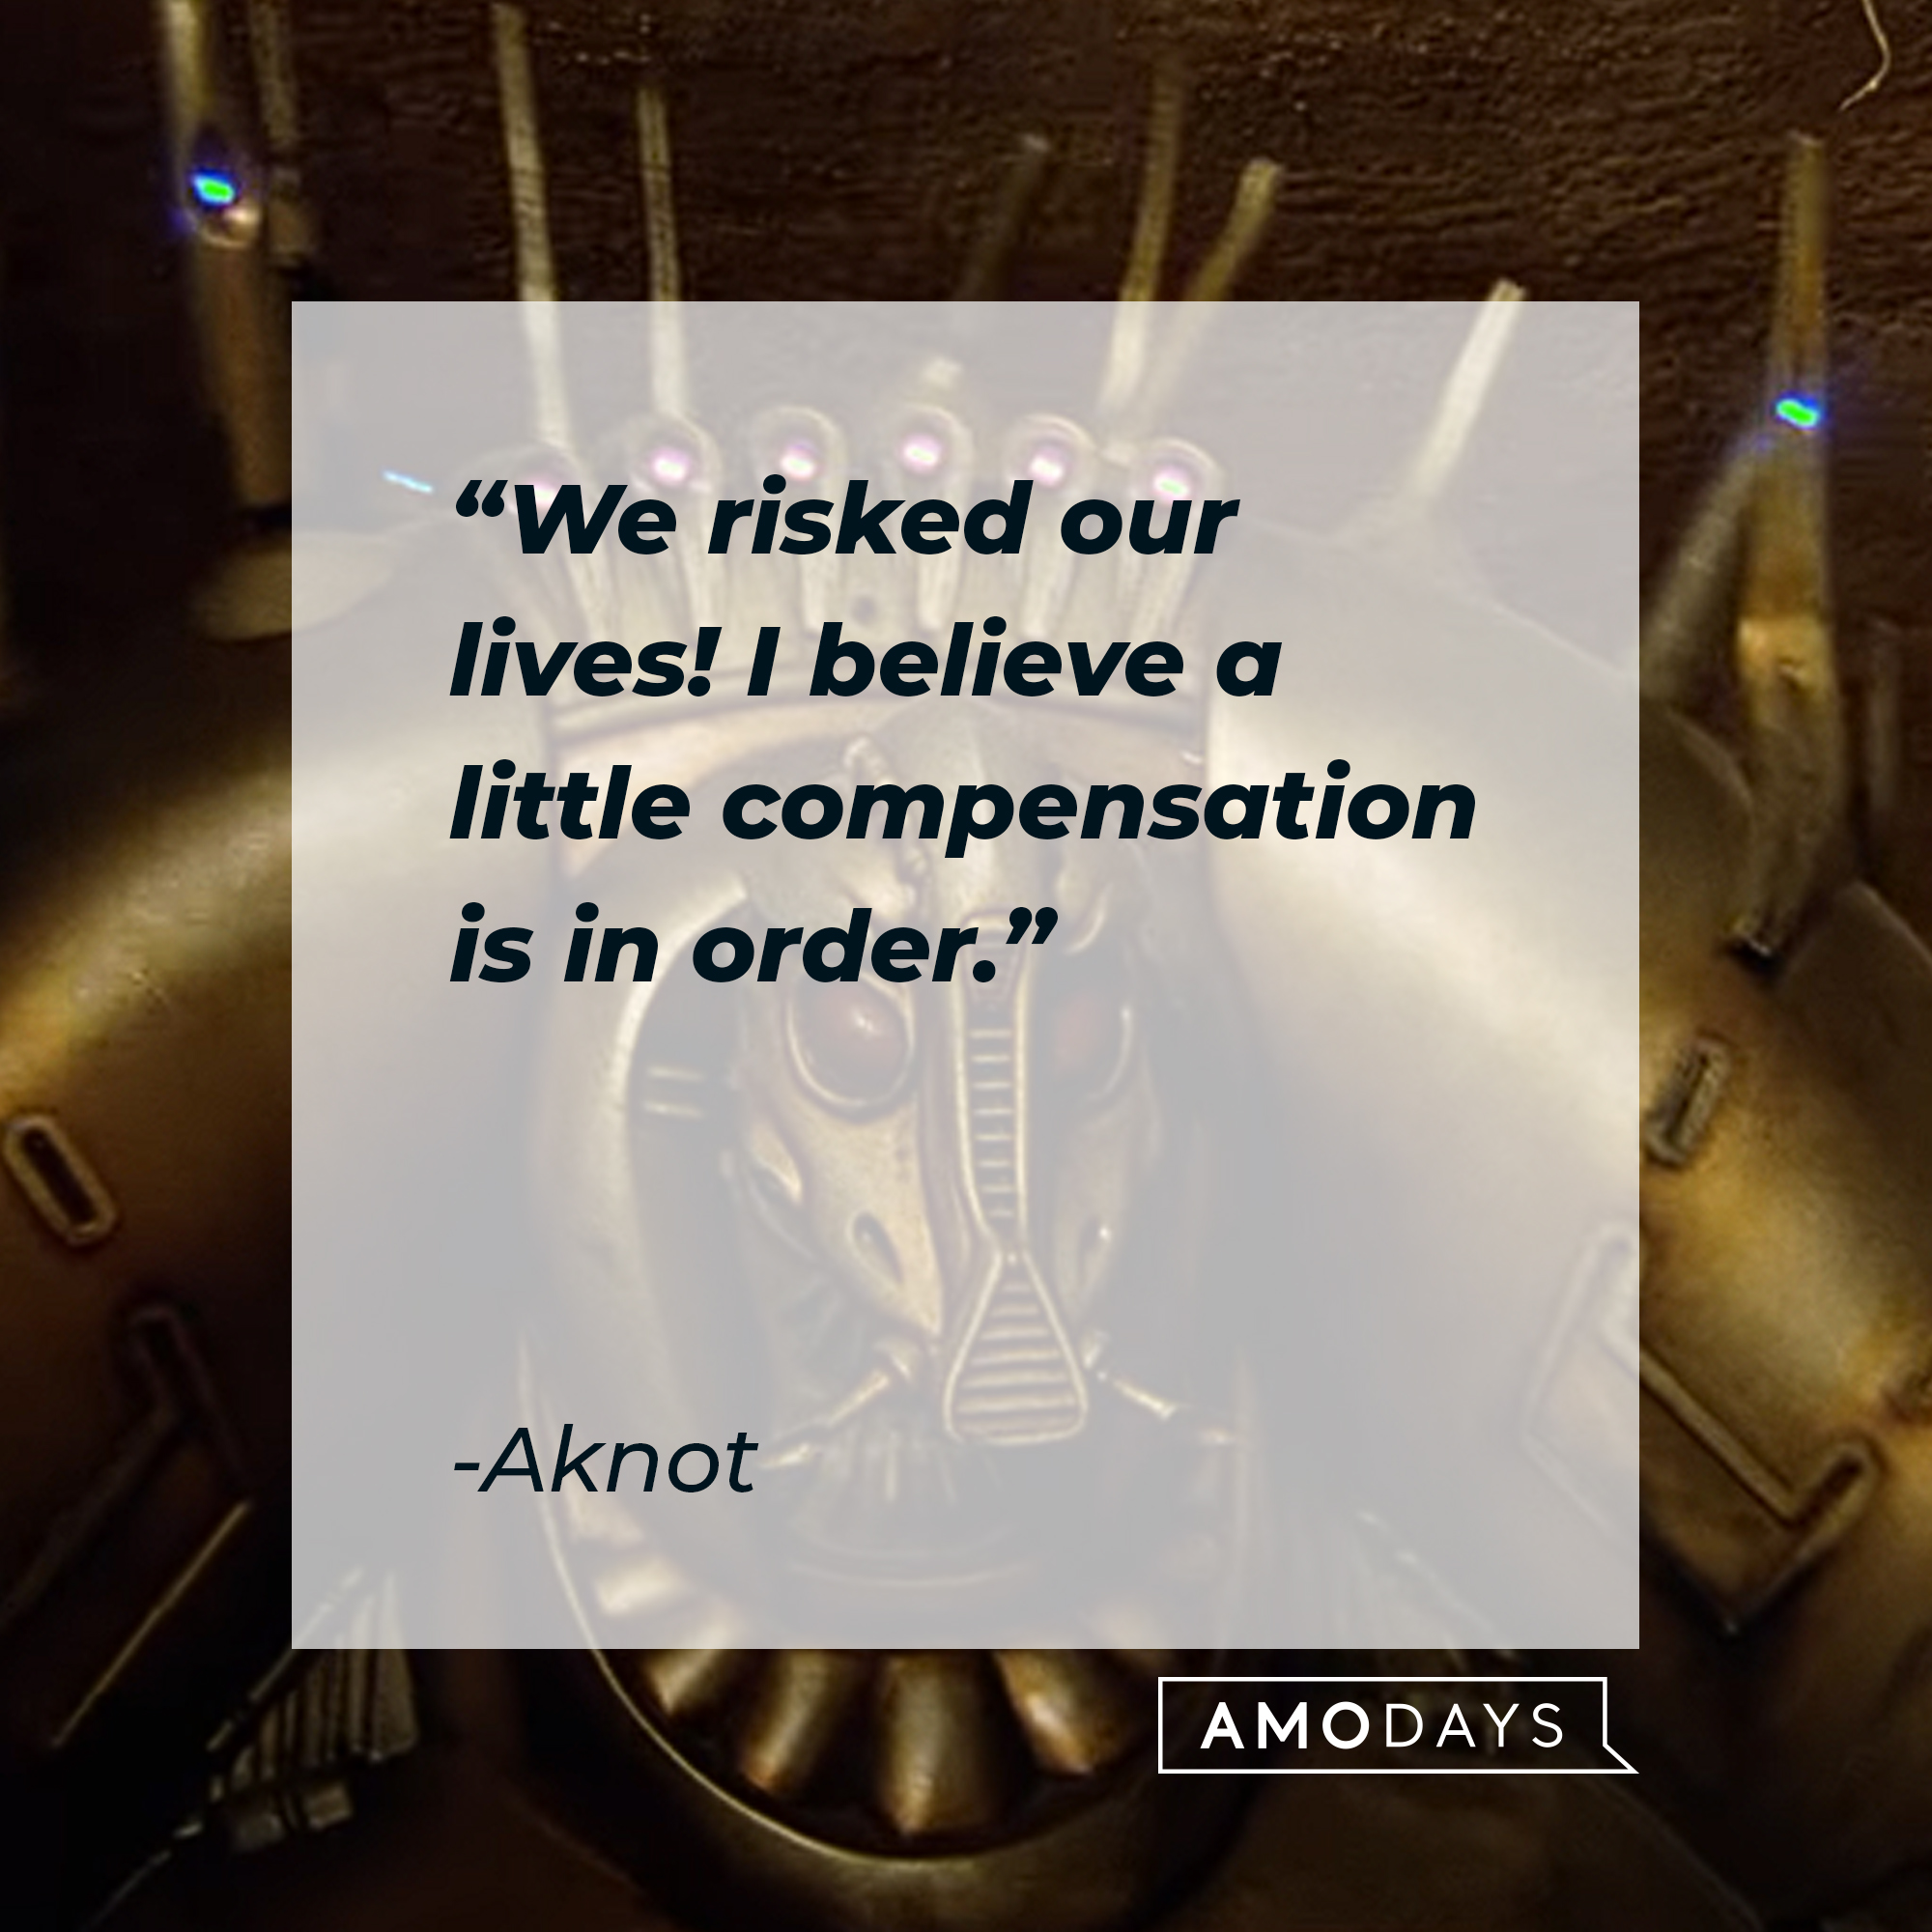 Aknot's quote: Aknot "We risked our lives! I believe a little compensation is in order." | Source: youtube.com/sonypictures